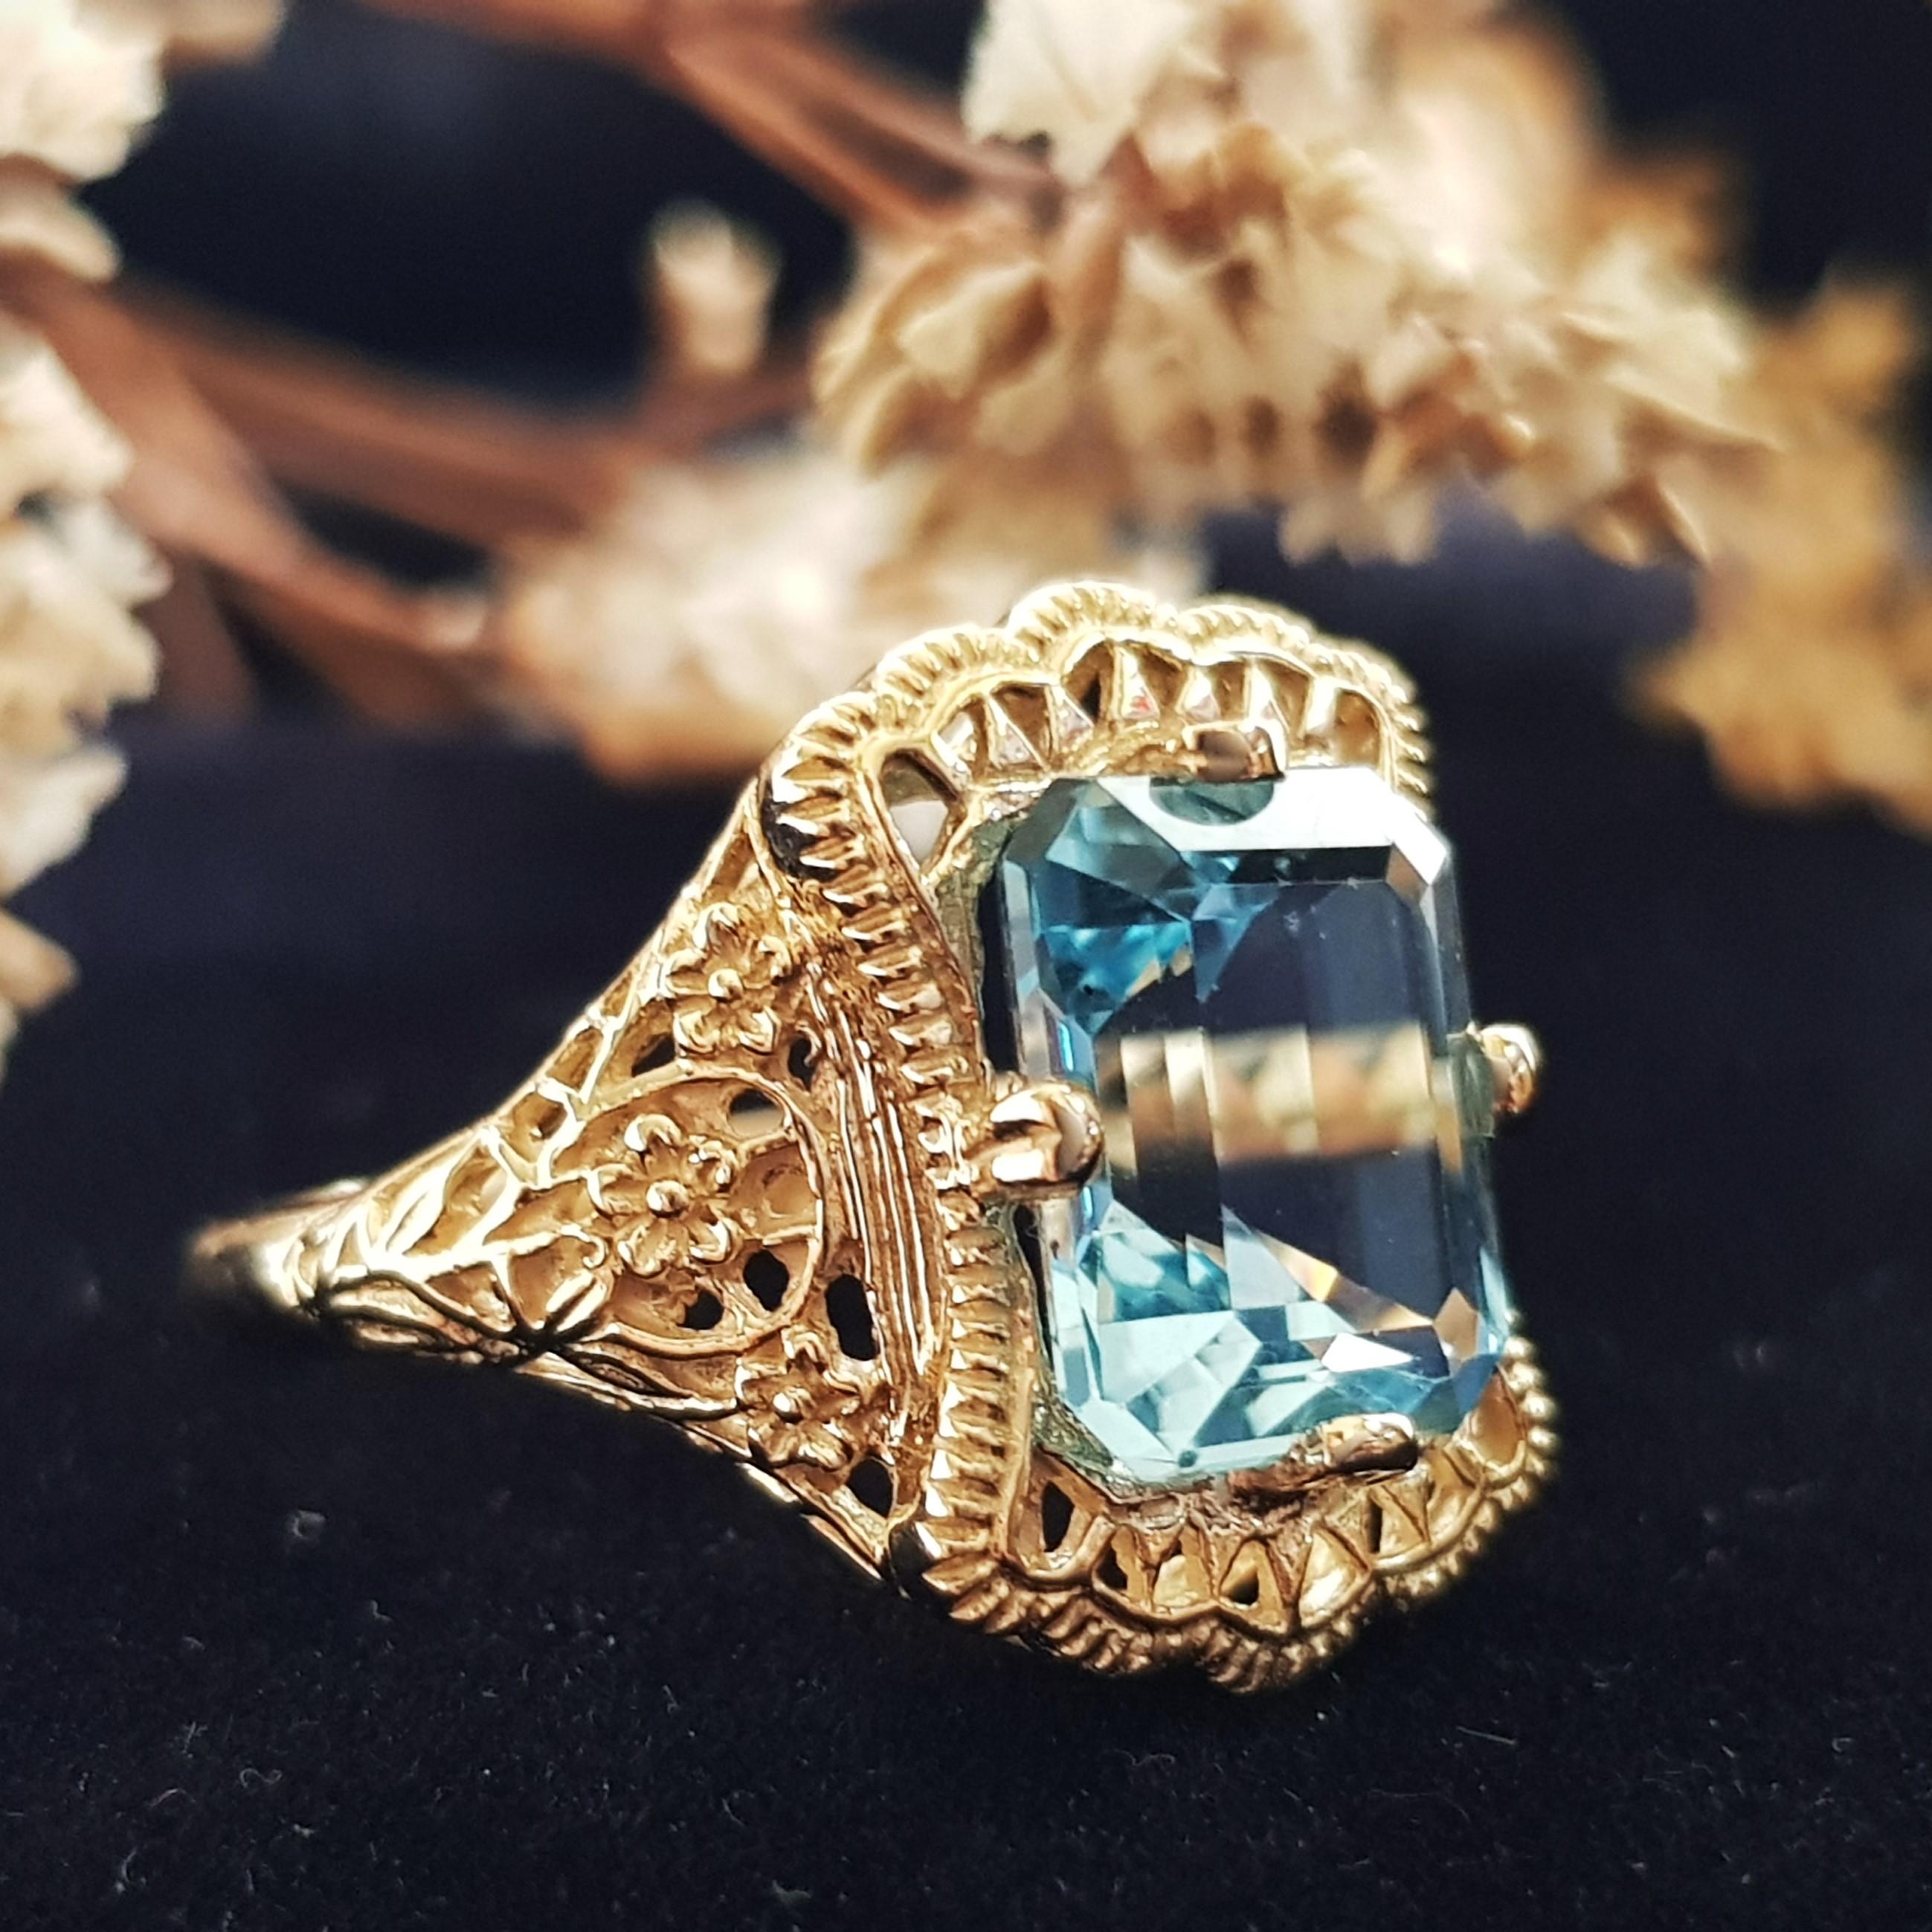 An Art Deco style filigree ring with 4.5 carats natural emerald cut blue topaz in the center. Filigree rings are timeless in style and can be enjoyed, cherished and handed down as precious family heirlooms.

Ring Information
Metal: 14K Yellow Gold –